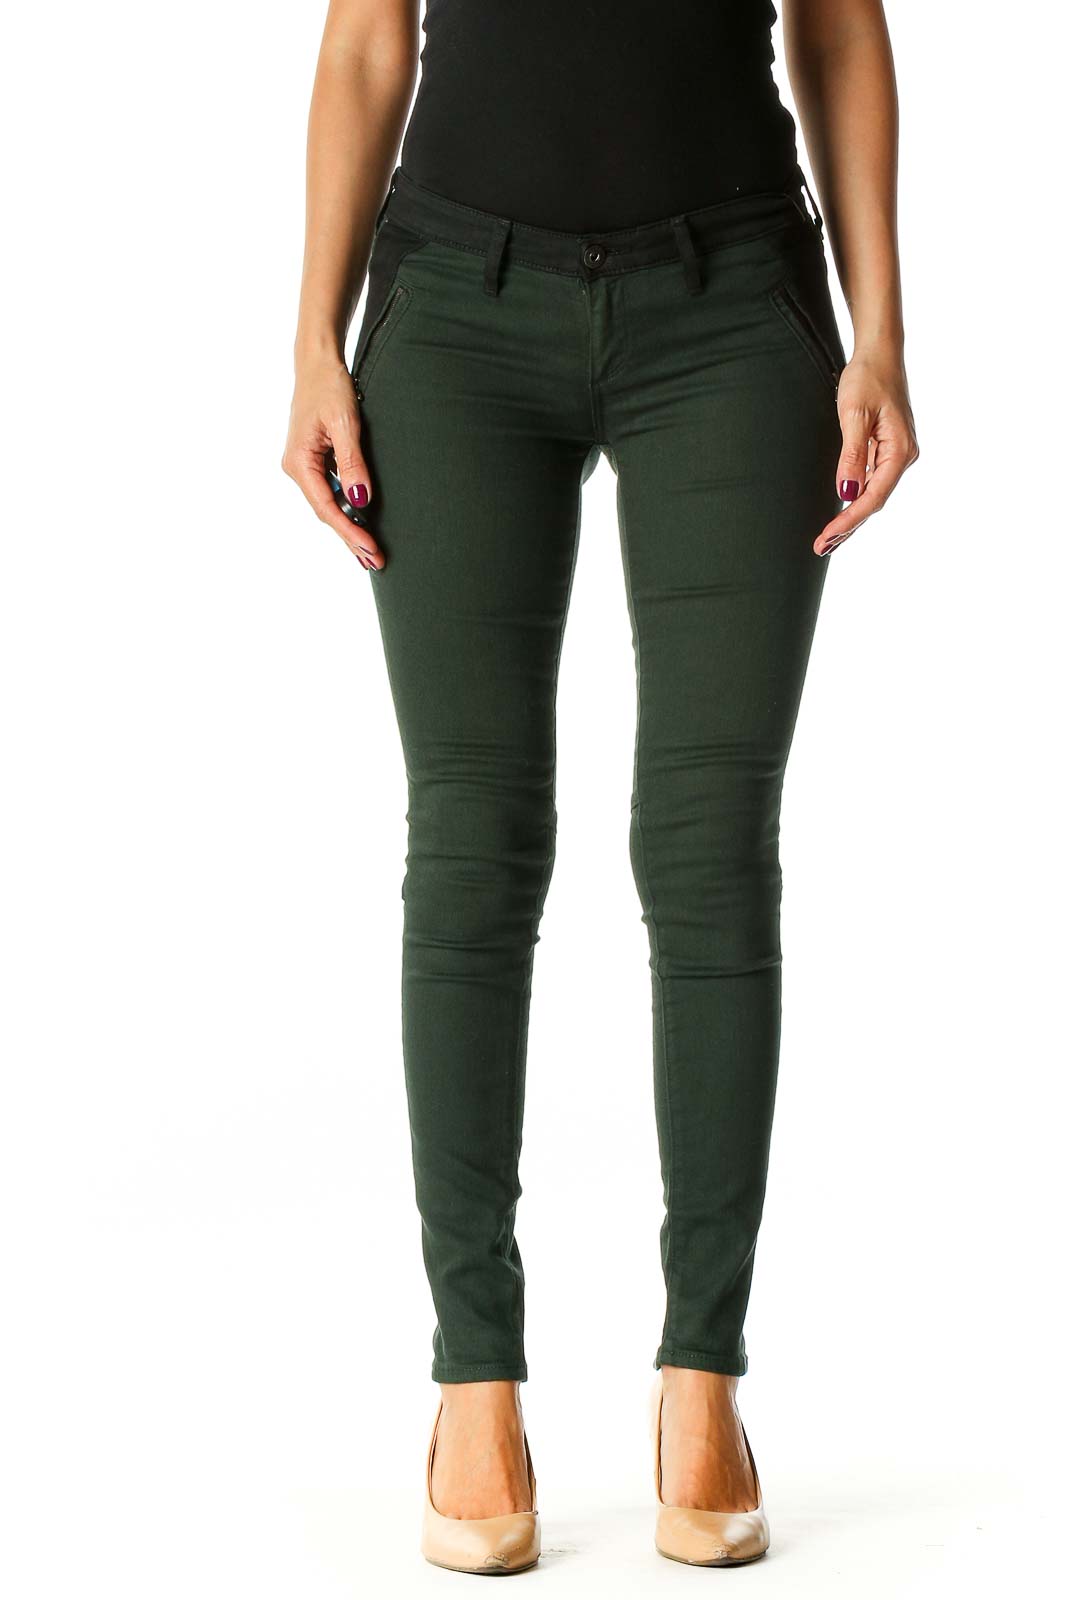 Green Black Solid Chic Skinny Pants Front